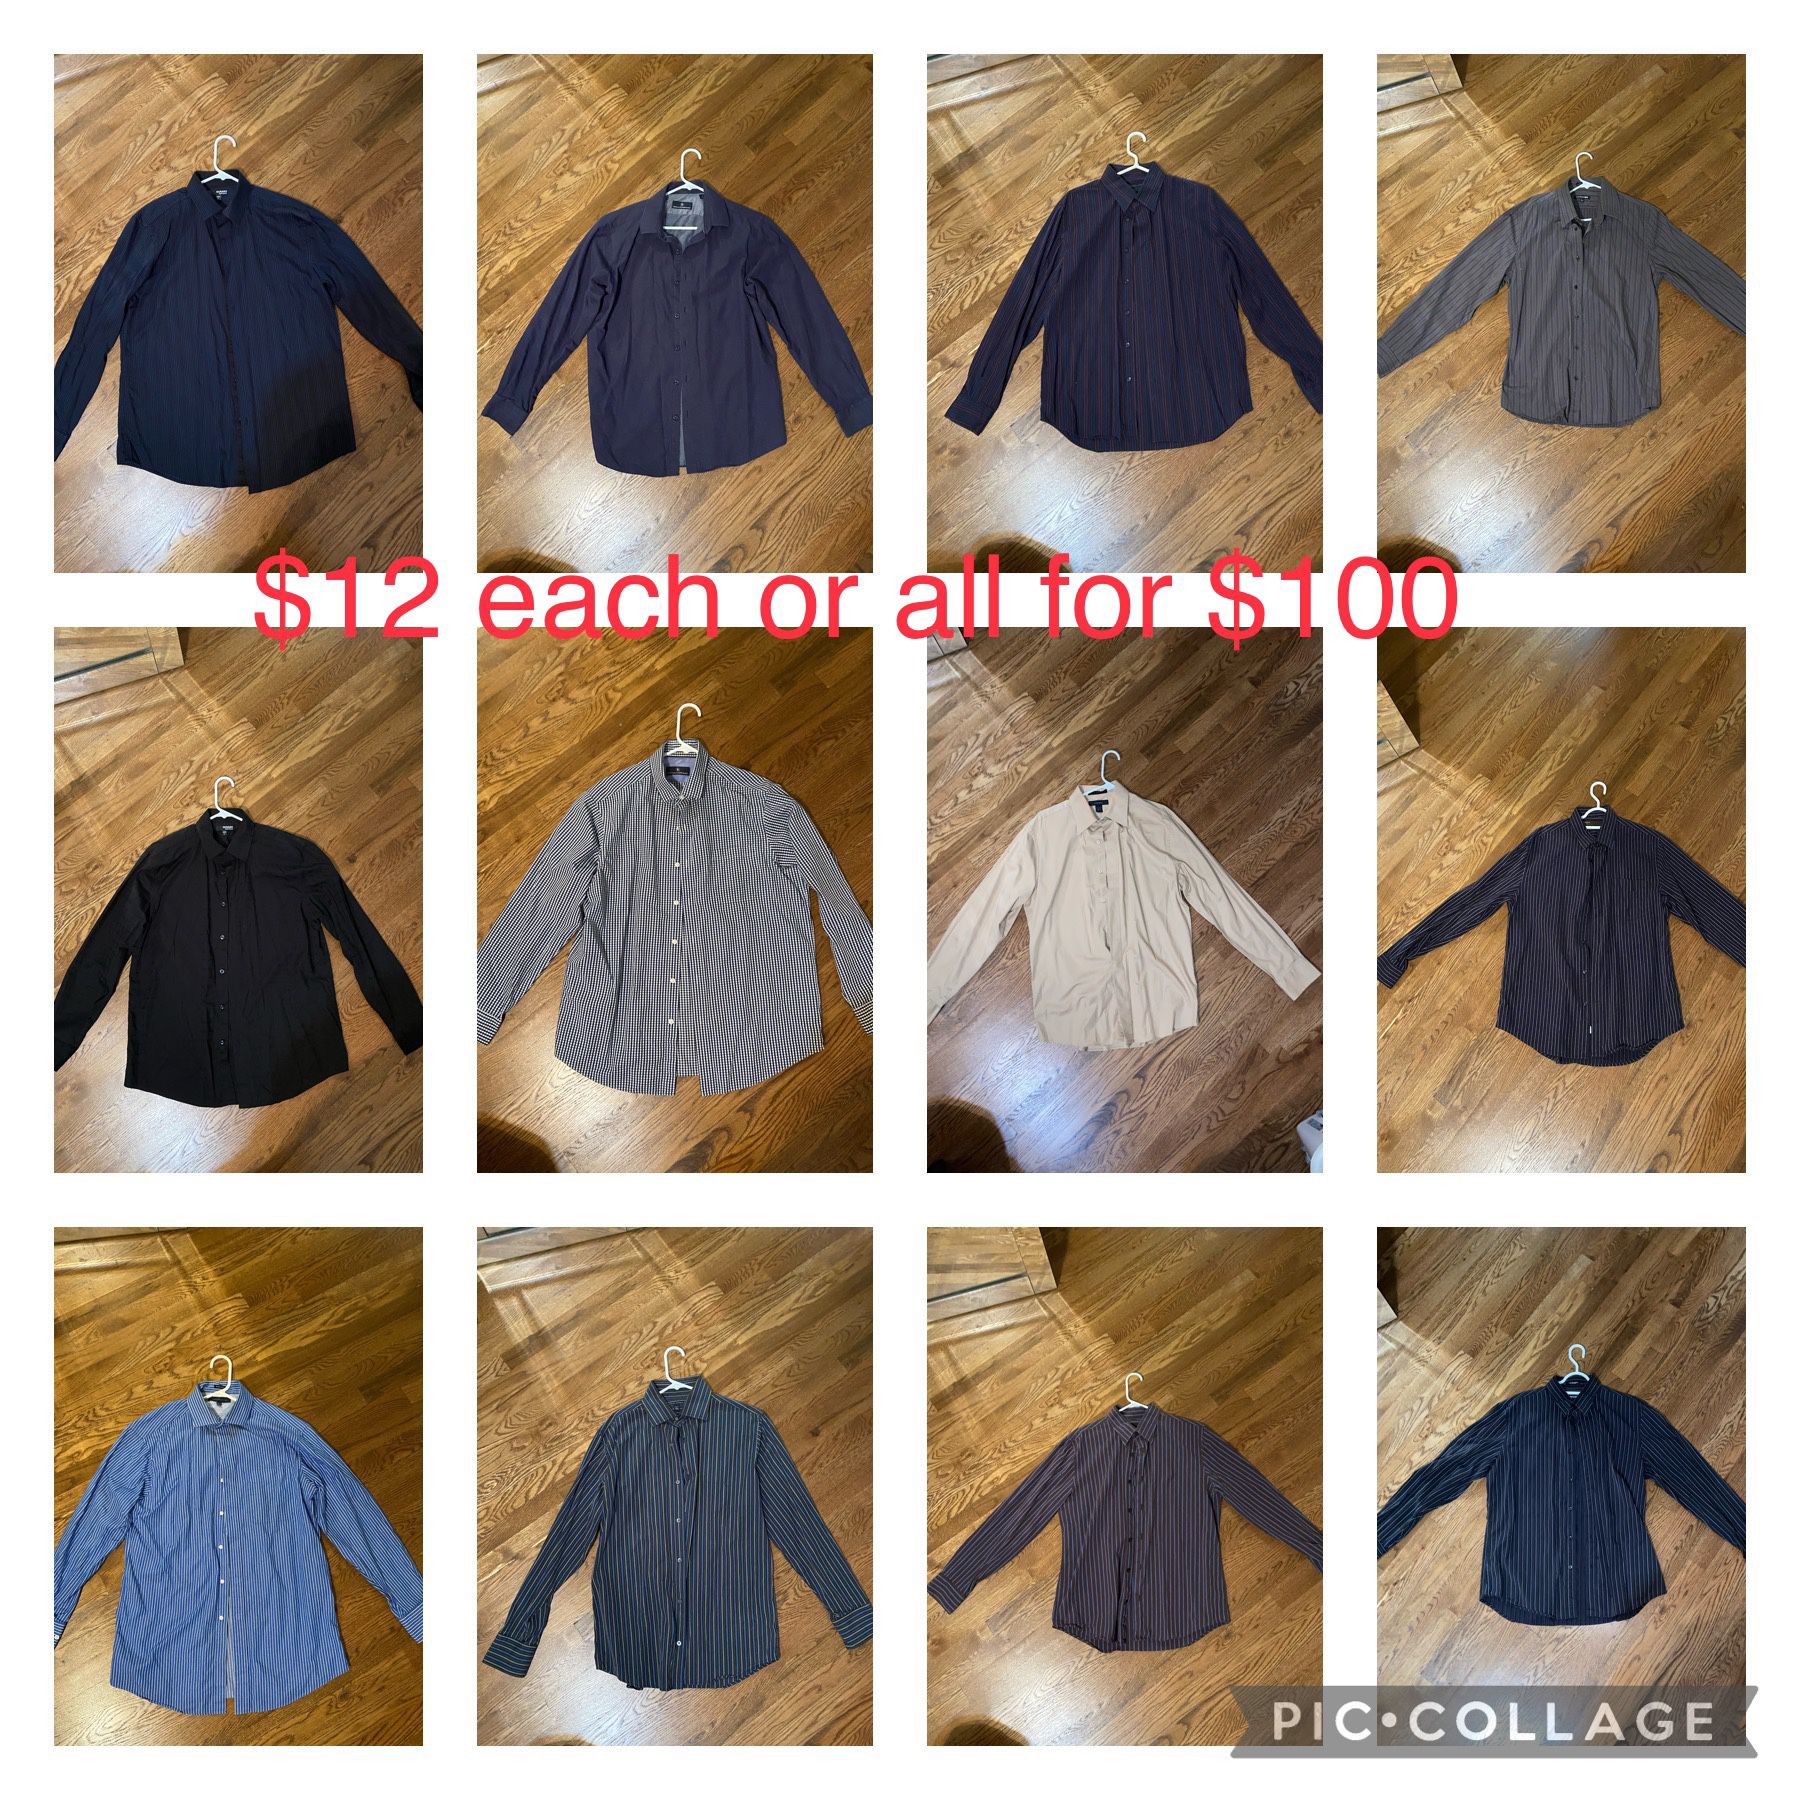 Price Reduced!!! Bundle Of Dress Shirts For Men $10 Each